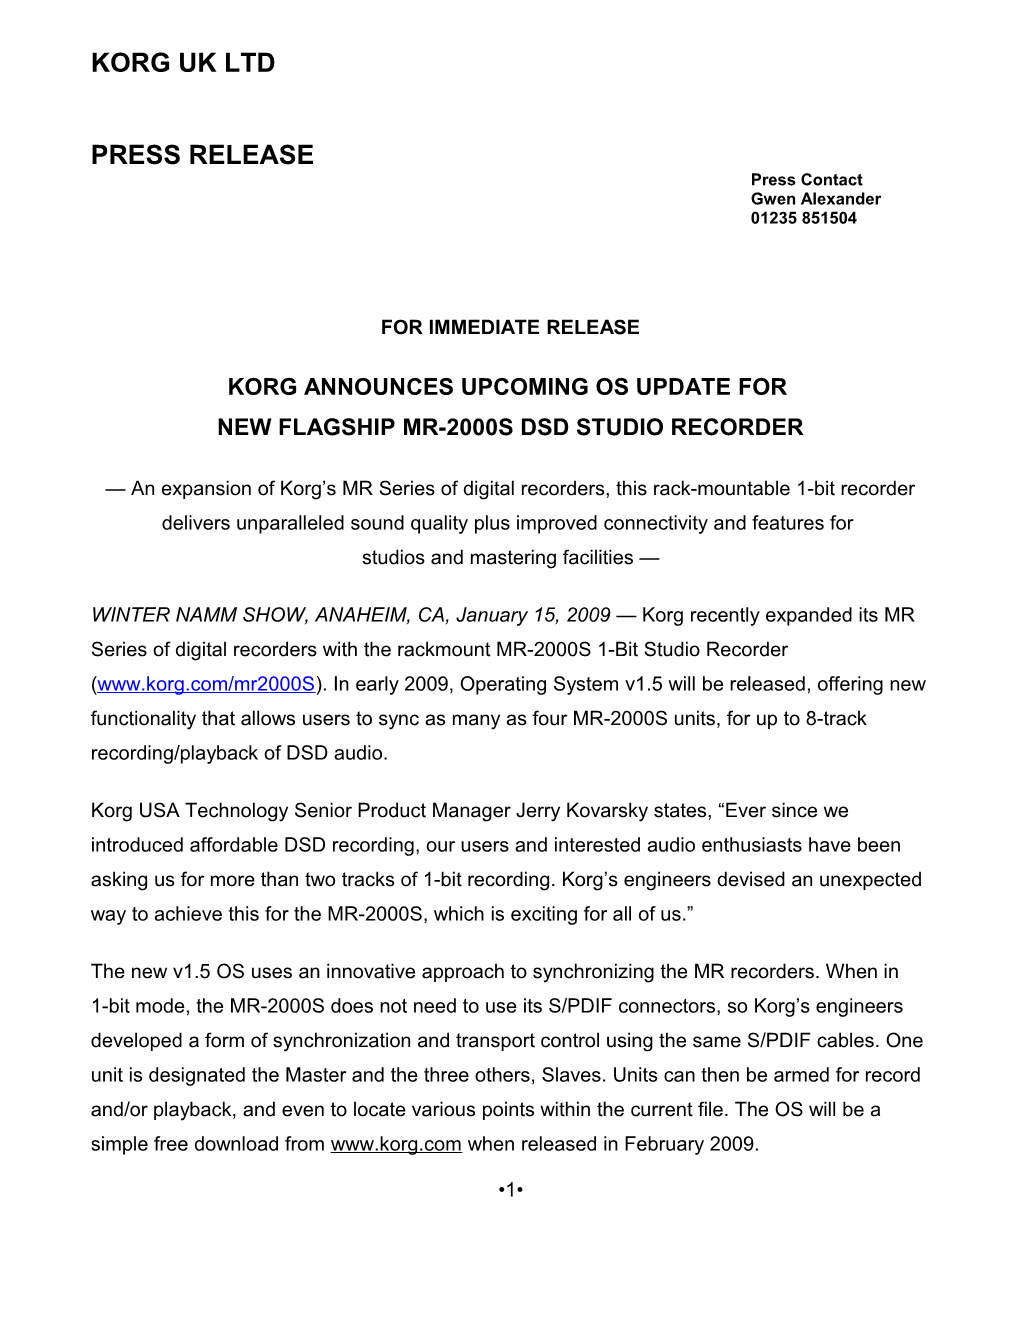 Korg Announces Upcoming Os Update For